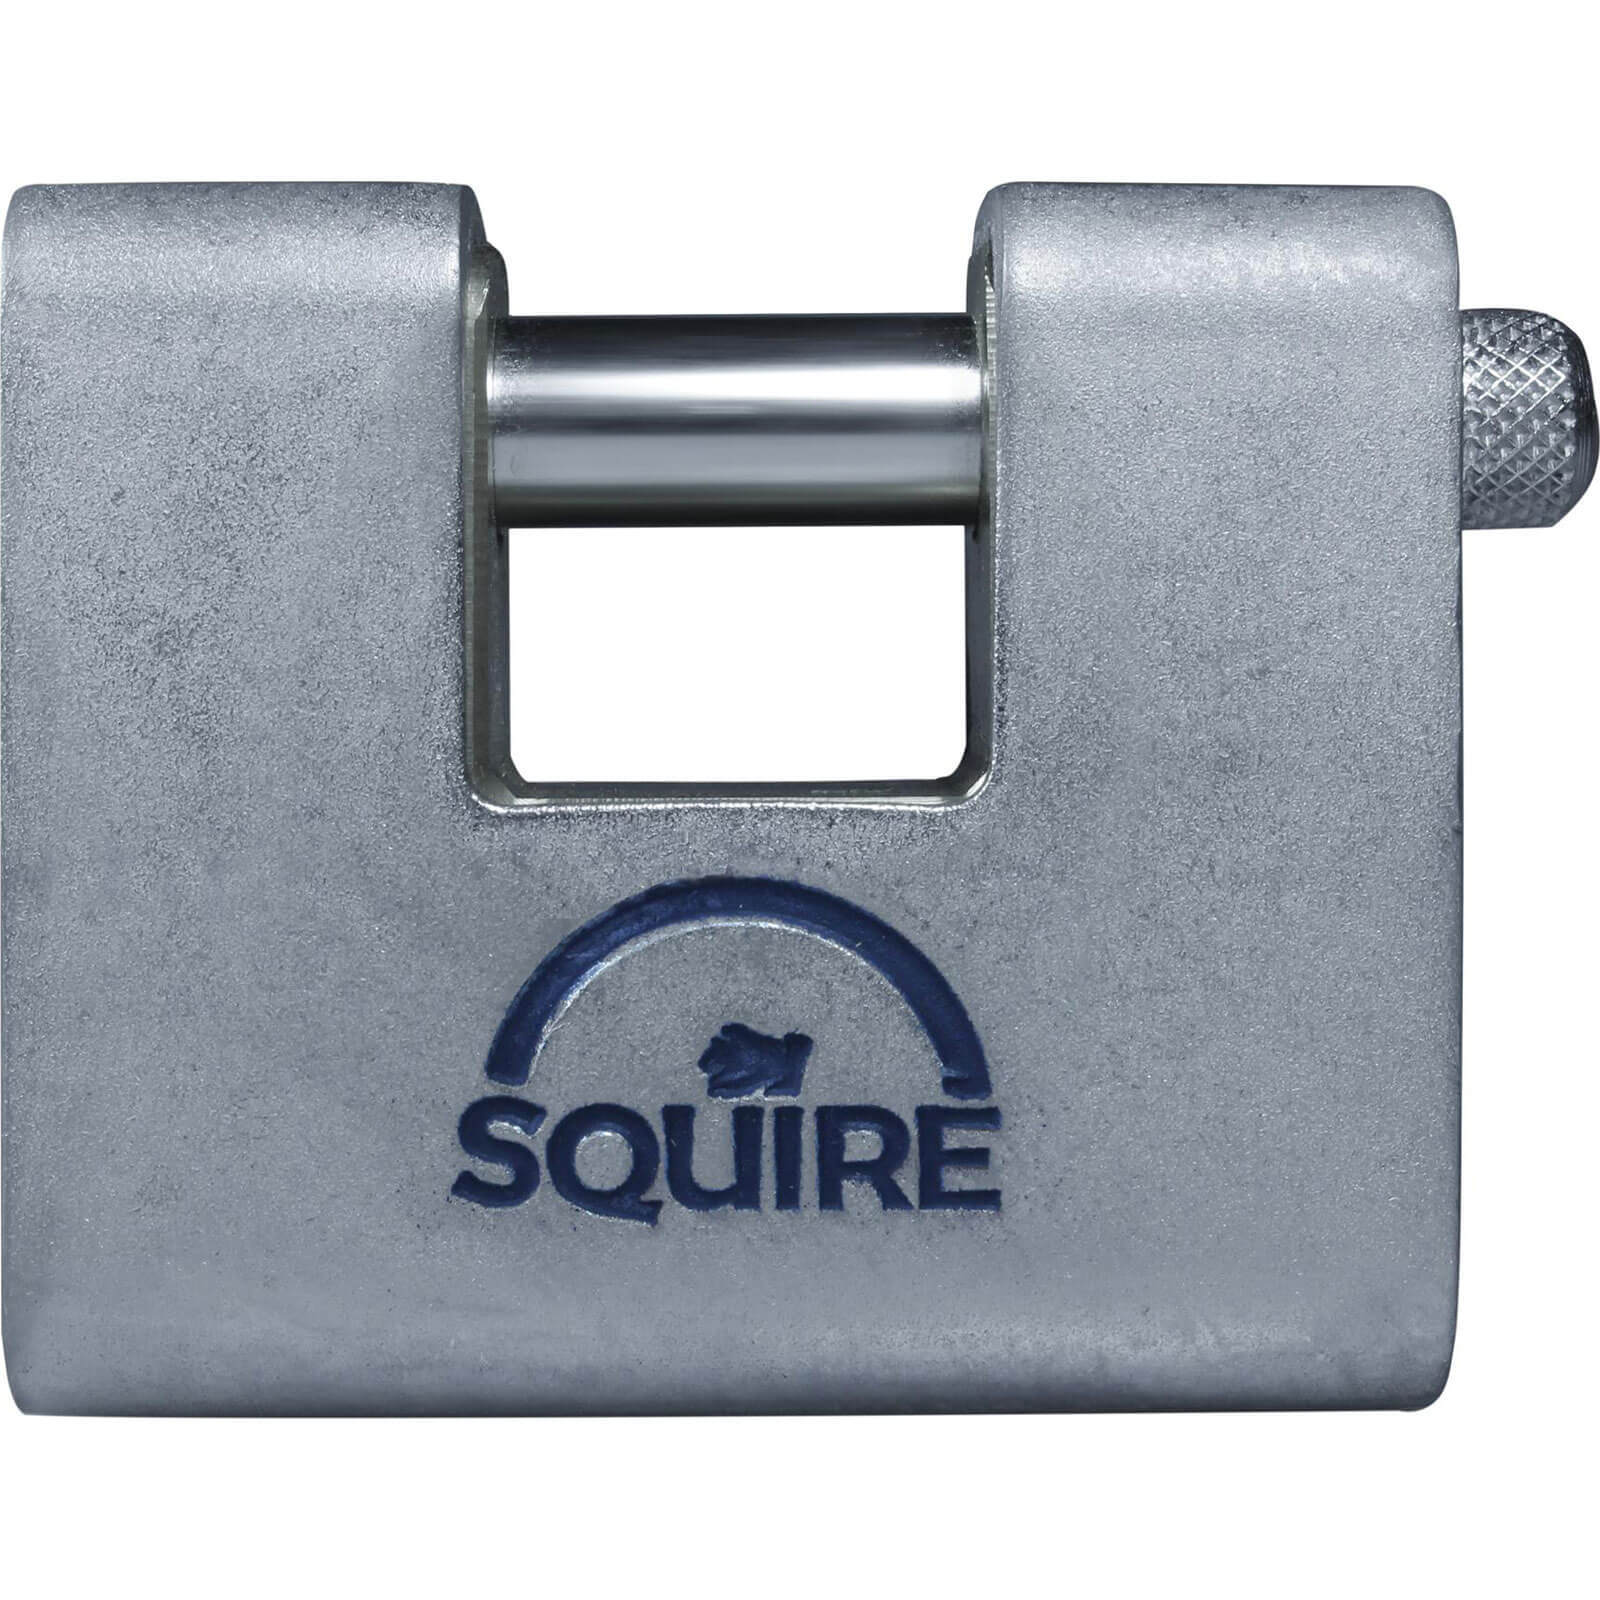 Image of Squire ASWL Armoured Warehouse Padlock 60mm Standard